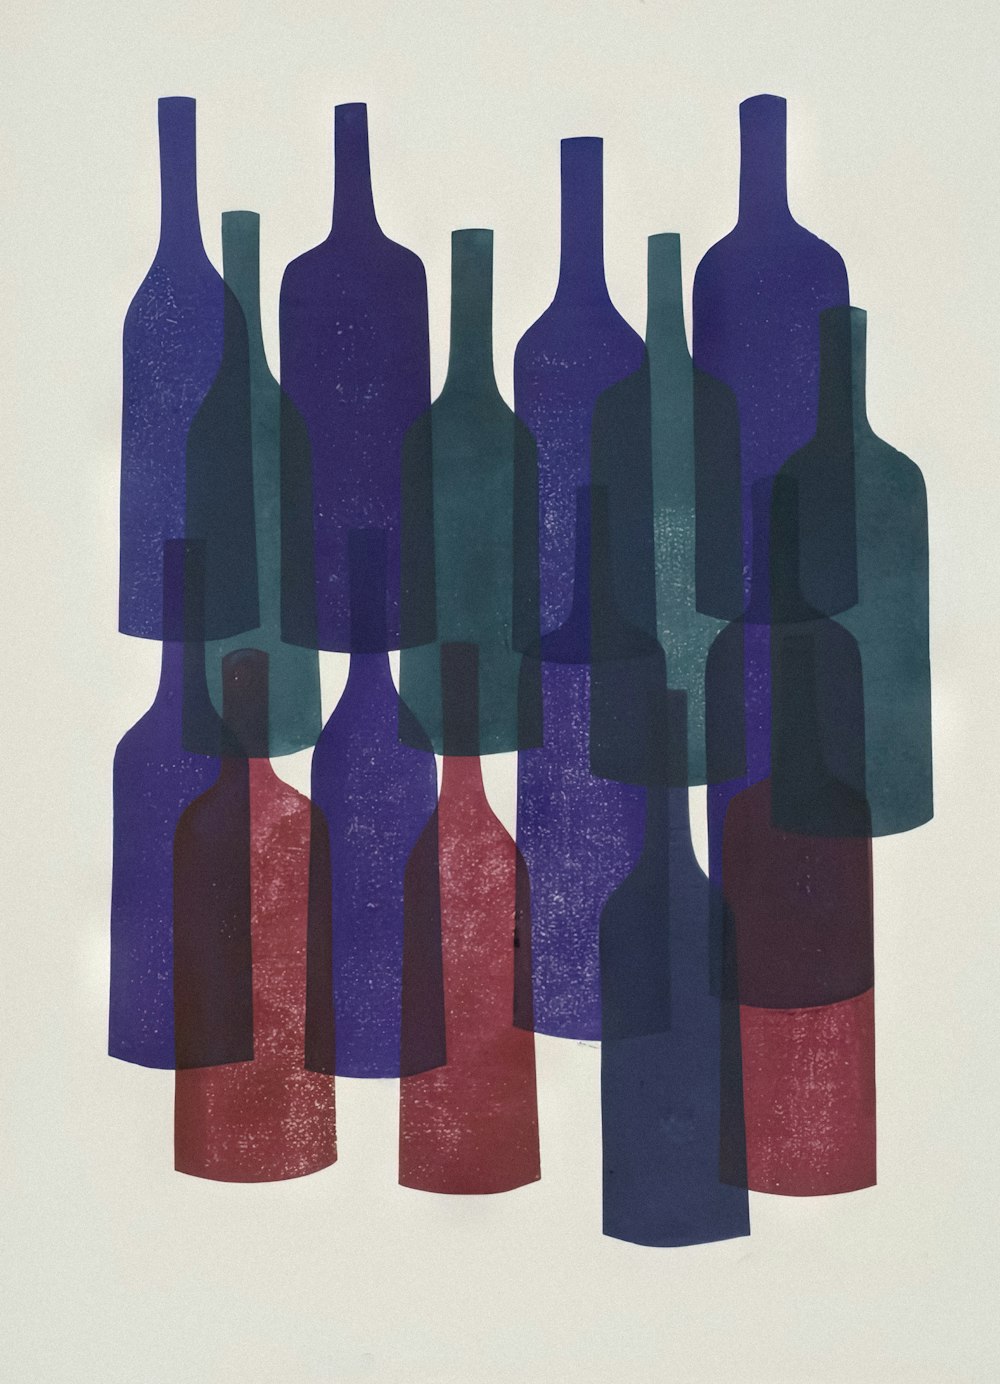 a painting of a group of wine bottles